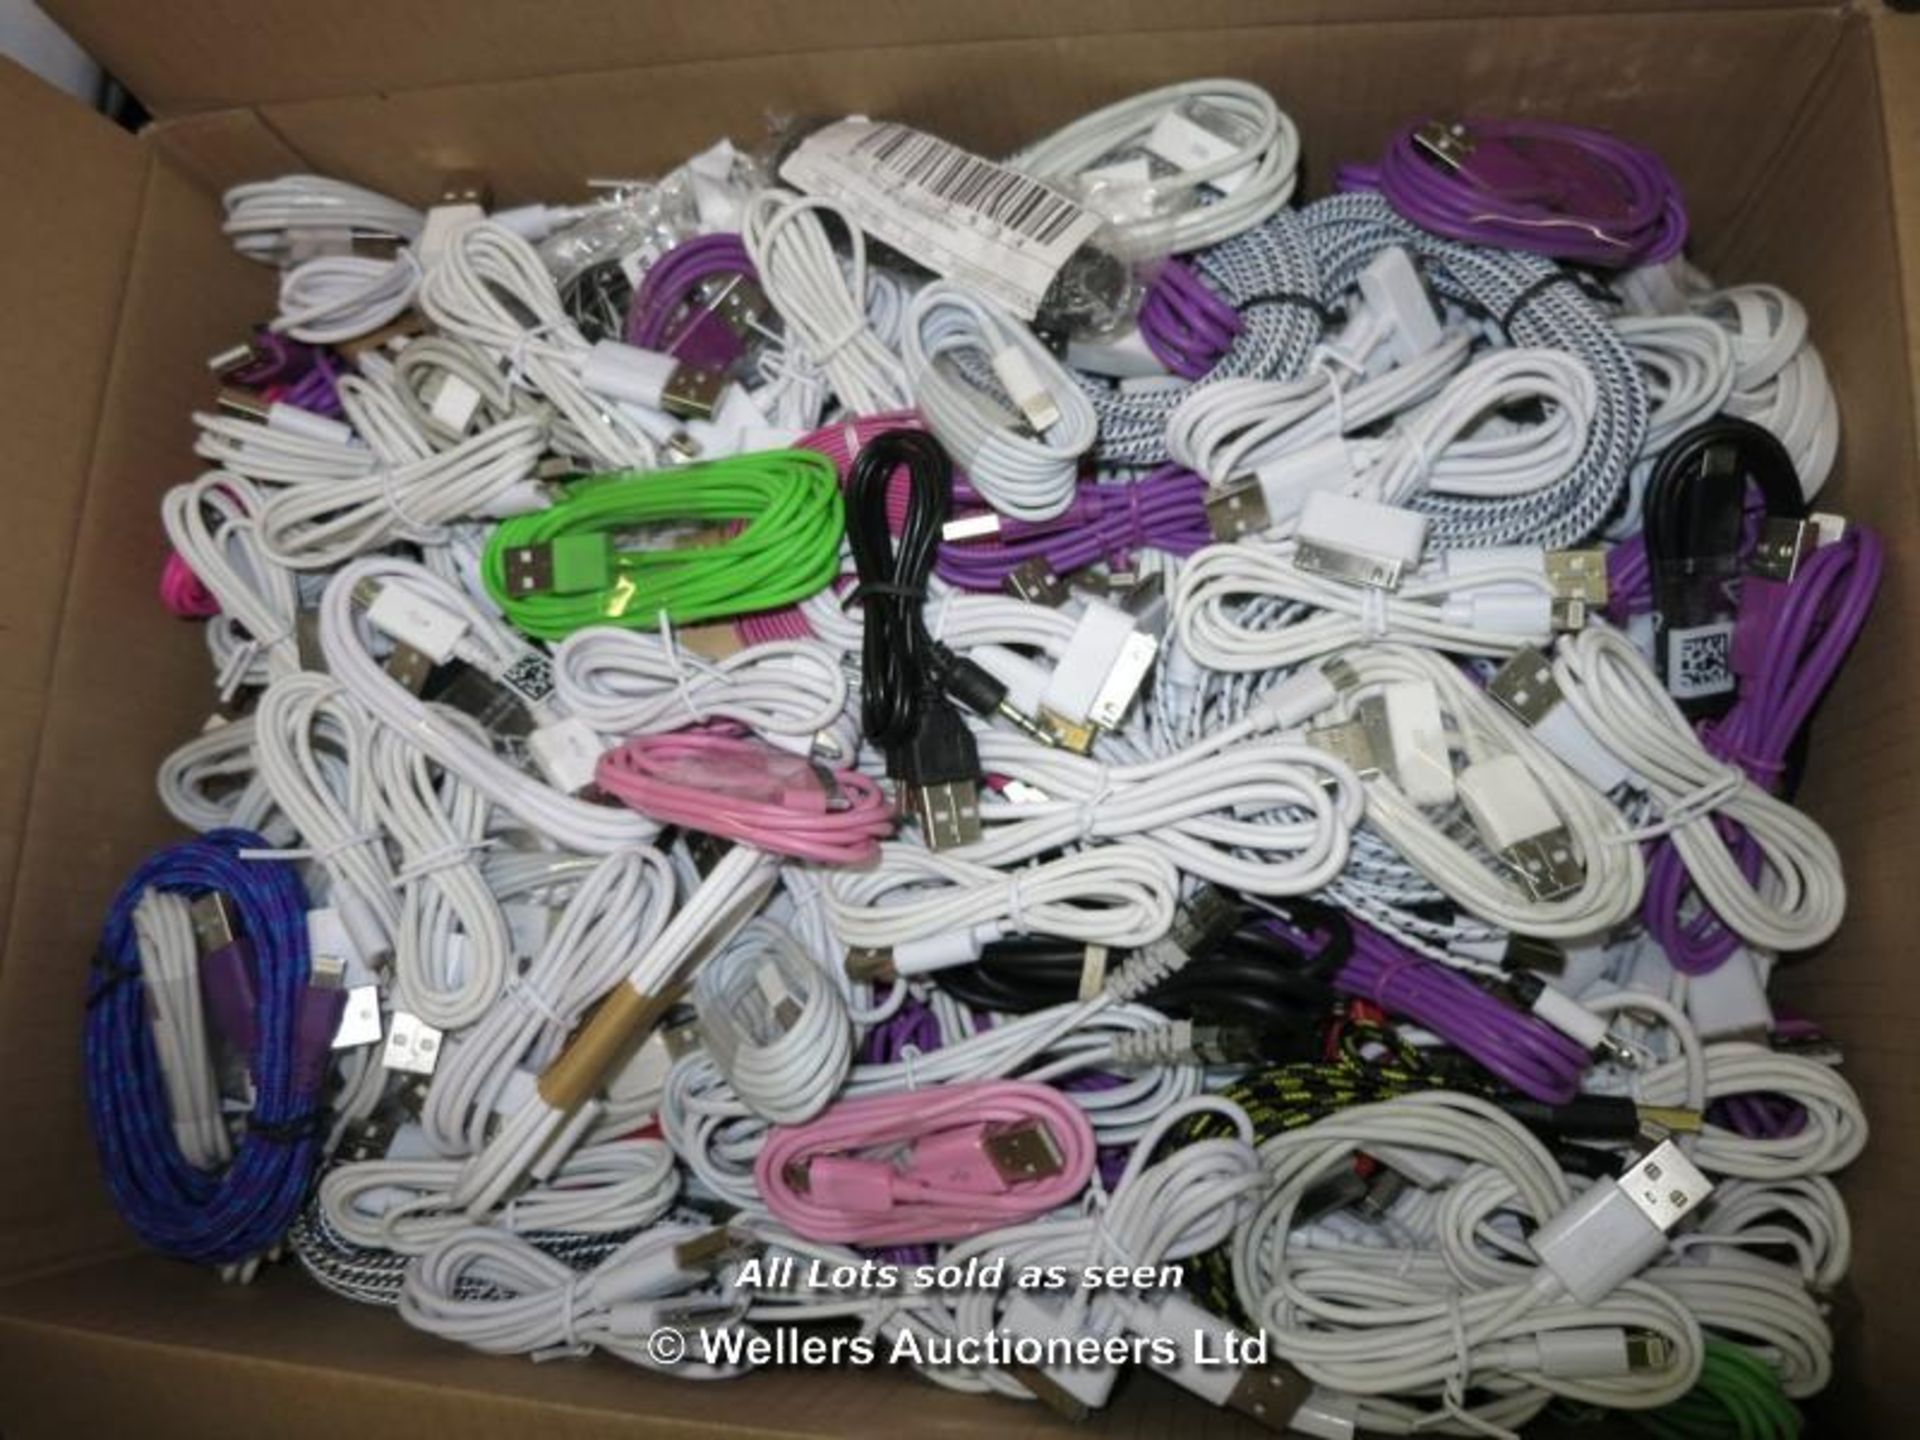 400X USB PHONE CABLES (LOOSE) / GRADE: UNCLAIMED PROPERTY / UNBOXED (DC2){YT00551521GB[MK290715]